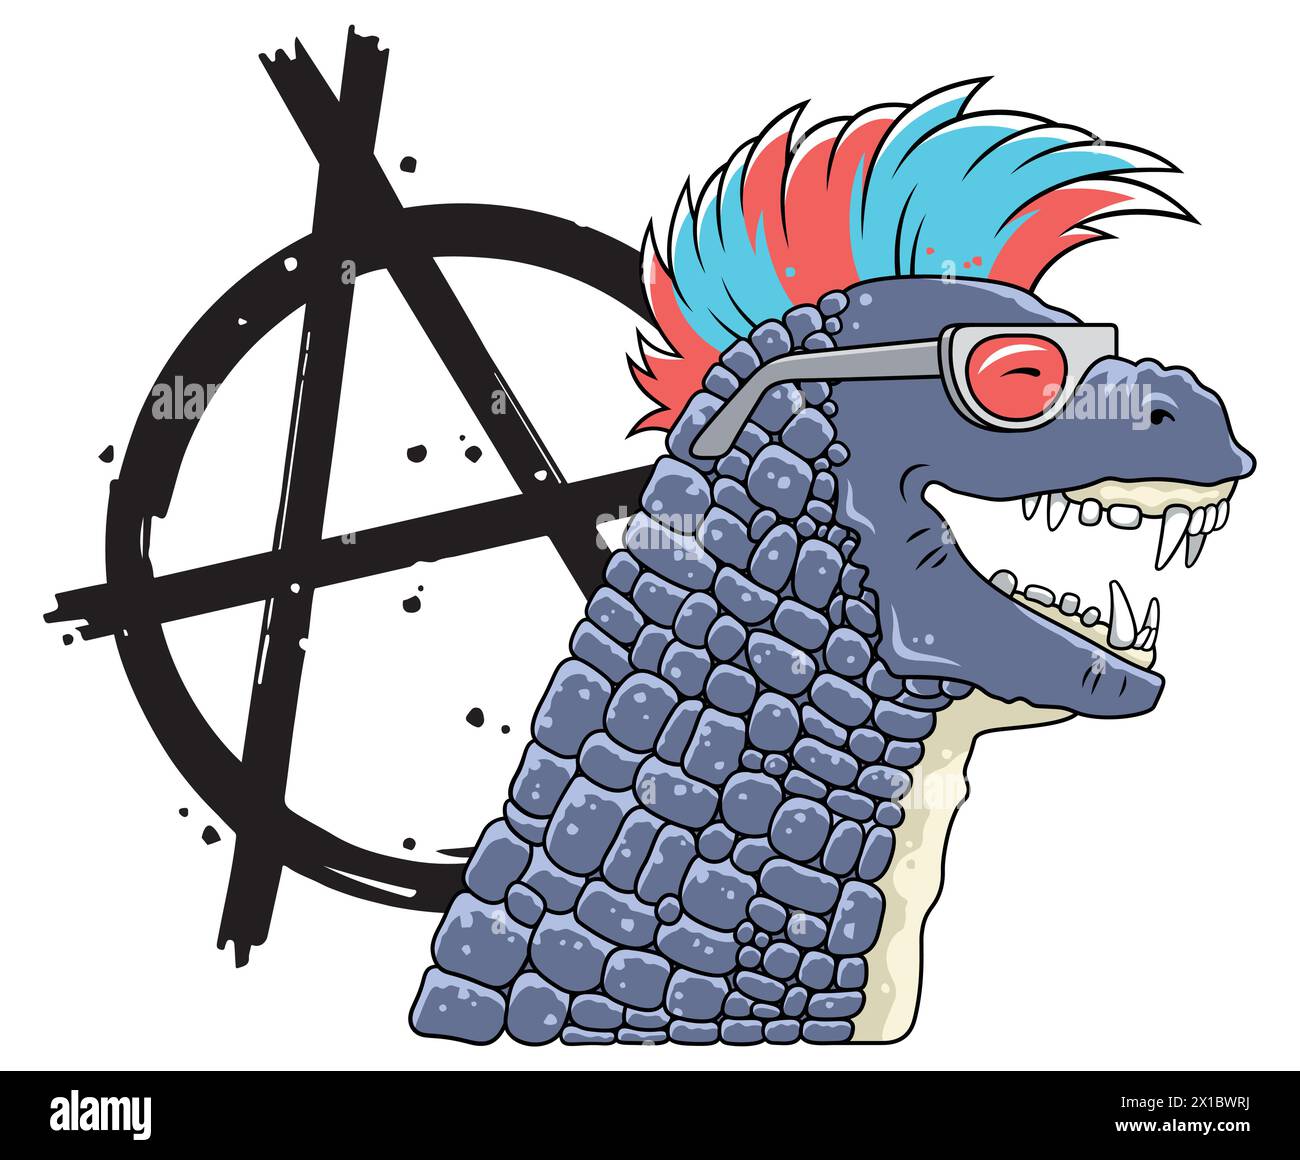 Cartoon dinosaur in punk rock style for kid clothing design. Vector illustration of Dino and punk anarchy symbol Stock Vector